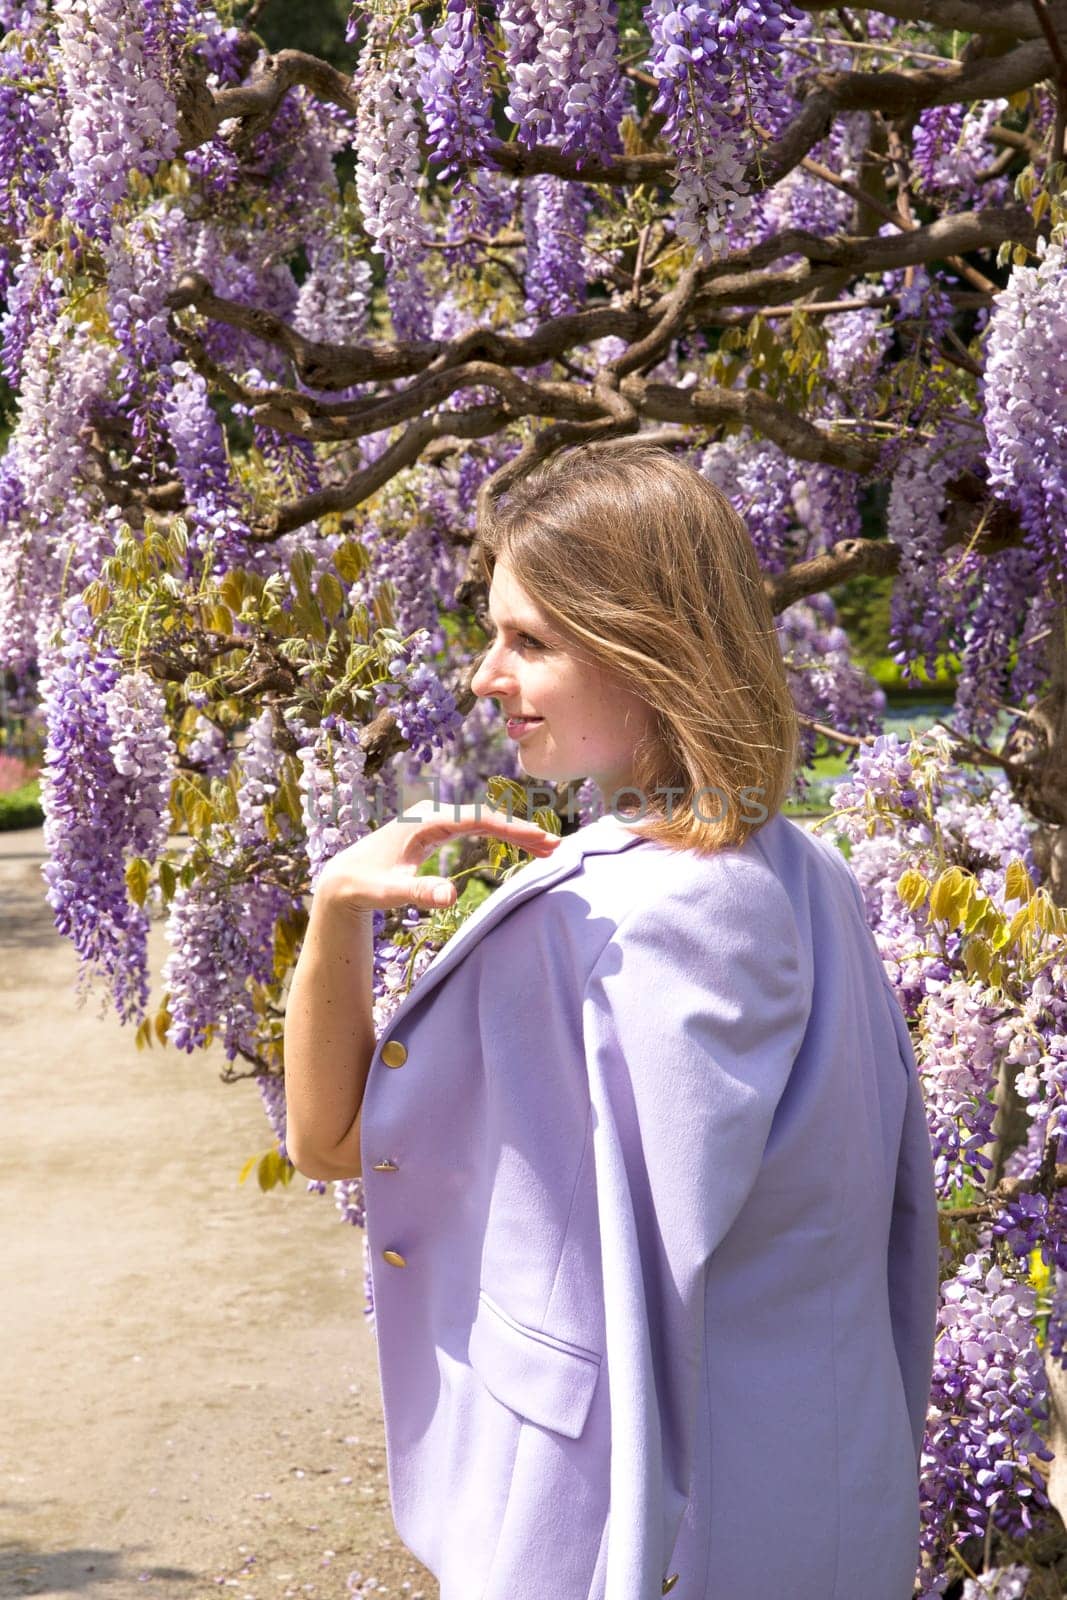 A young woman in a lilac jacket poses near the flowering wisteria in the Garden by KaterinaDalemans